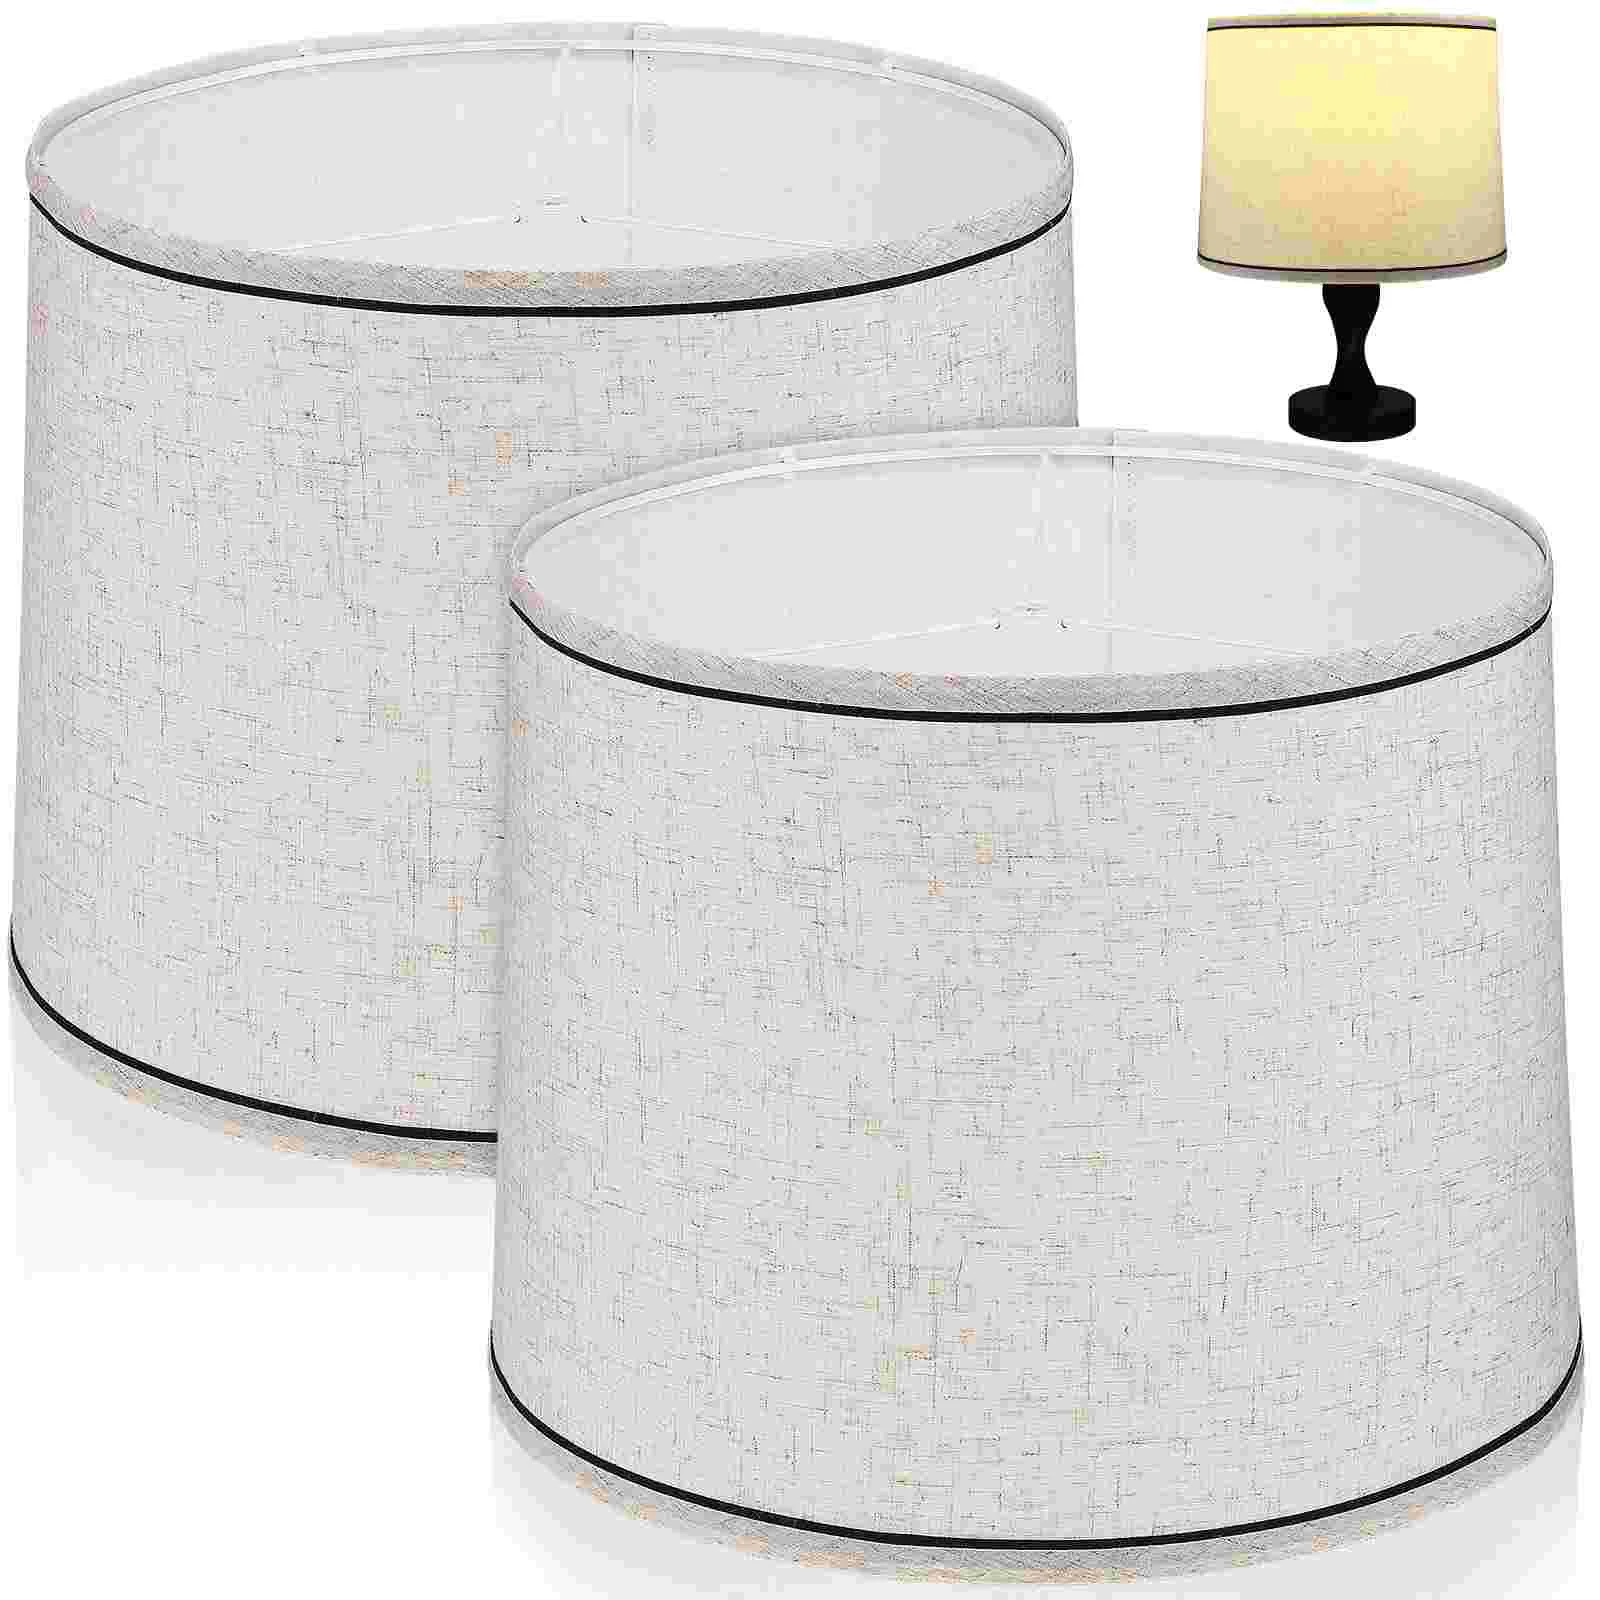 2Pcs Drum Lampshades Replacement Easy Assembly Linen Lamp Shades For Table Lampss Floor Lamps